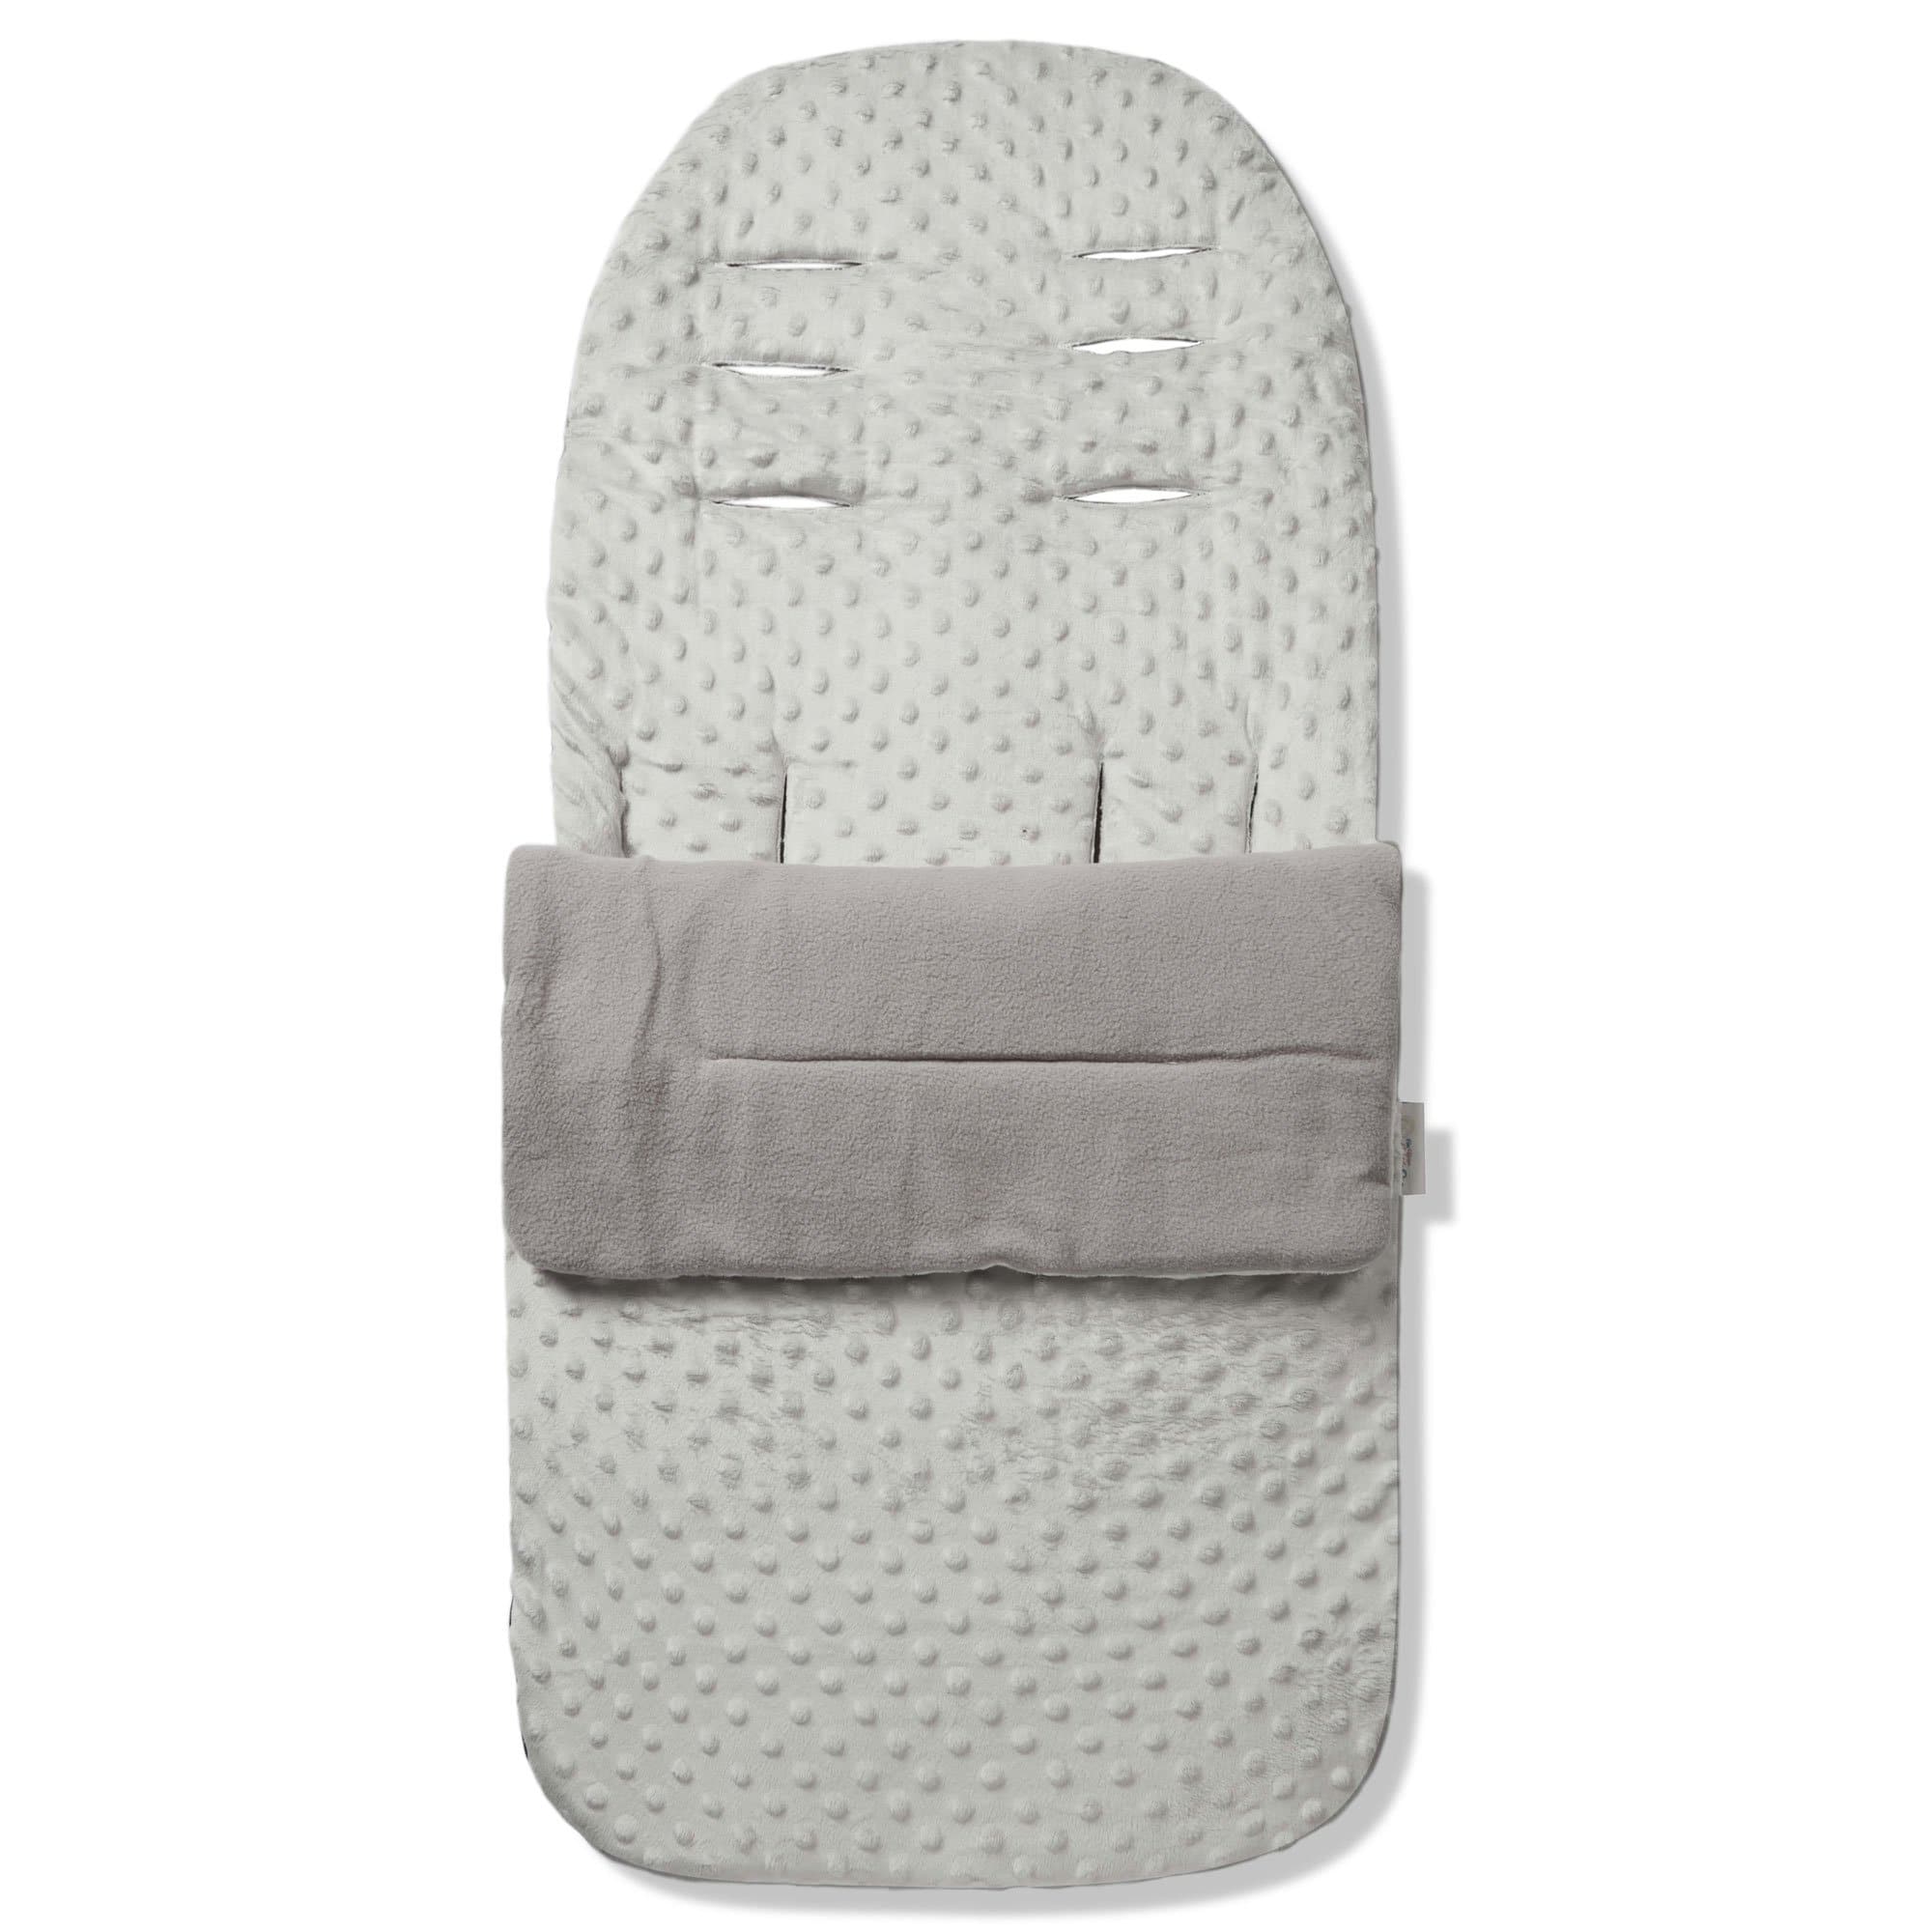 Dimple Footmuff / Cosy Toes Compatible with Mima - Grey / Fits All Models | For Your Little One